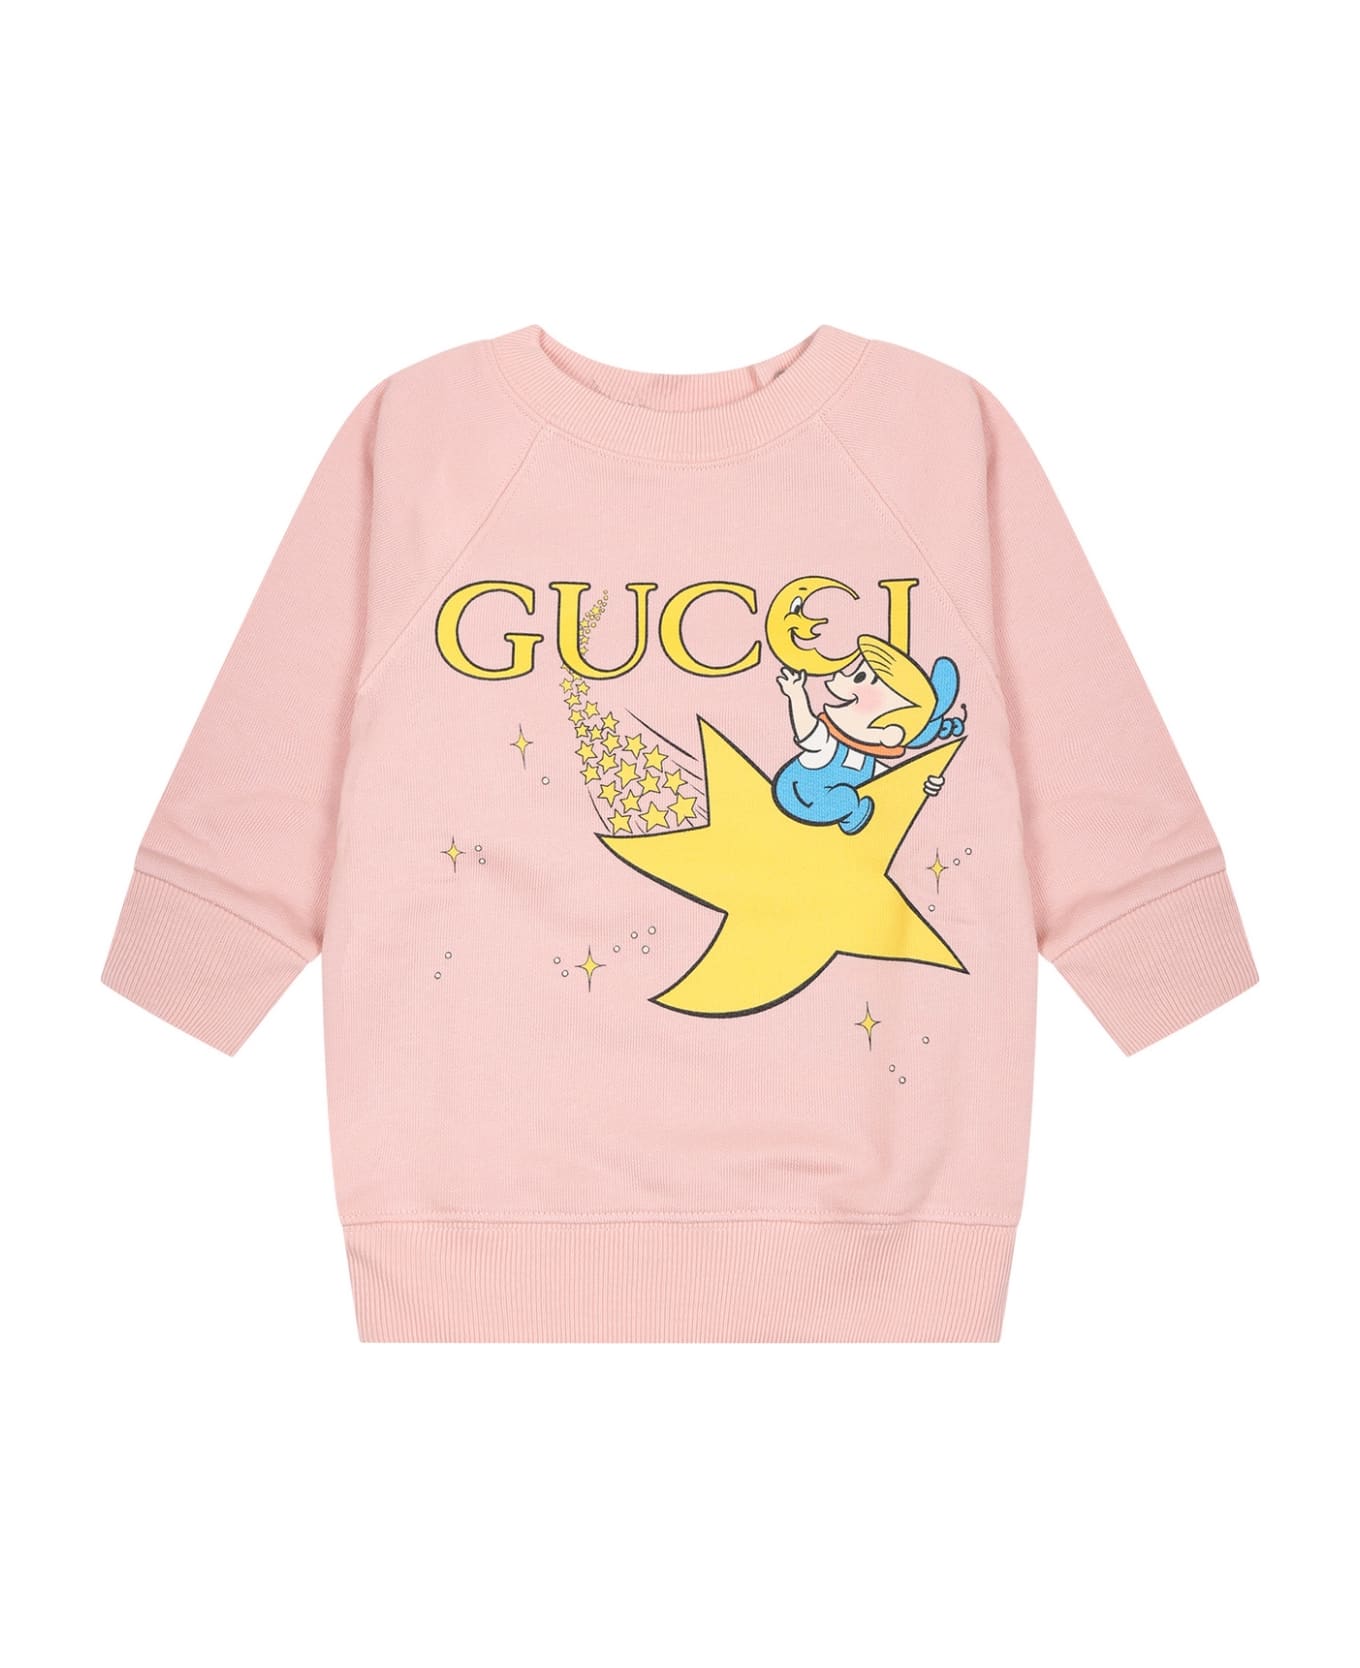 Gucci Pink Sweatshirt For Baby Girl With Print And Logo - Pink